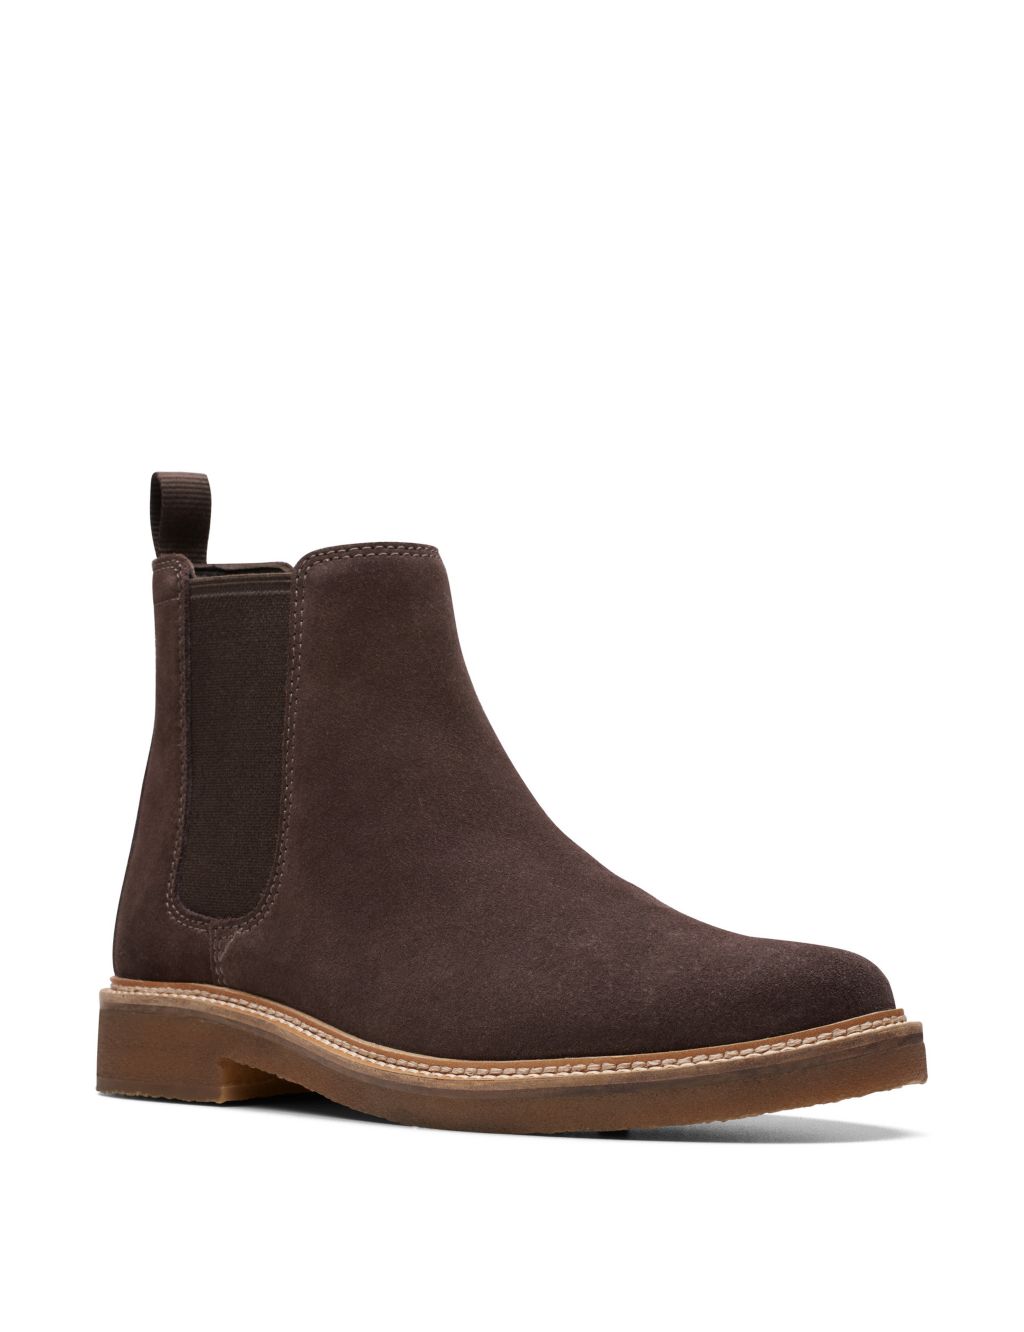 Suede Chelsea Boots image 2